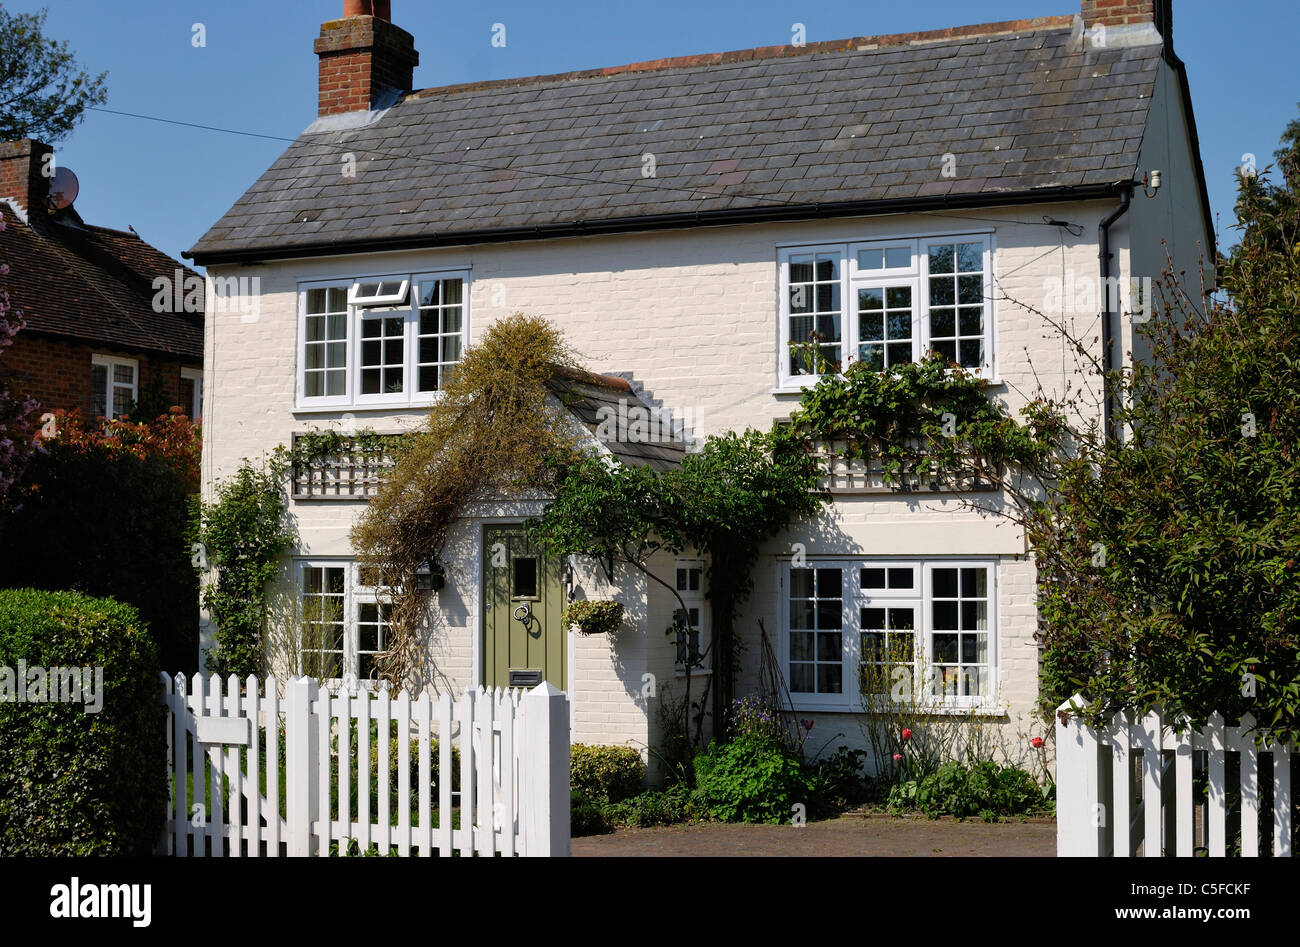 Pretty detached painted brick cottage in the village of Shoreham, Kent, England Stock Photo